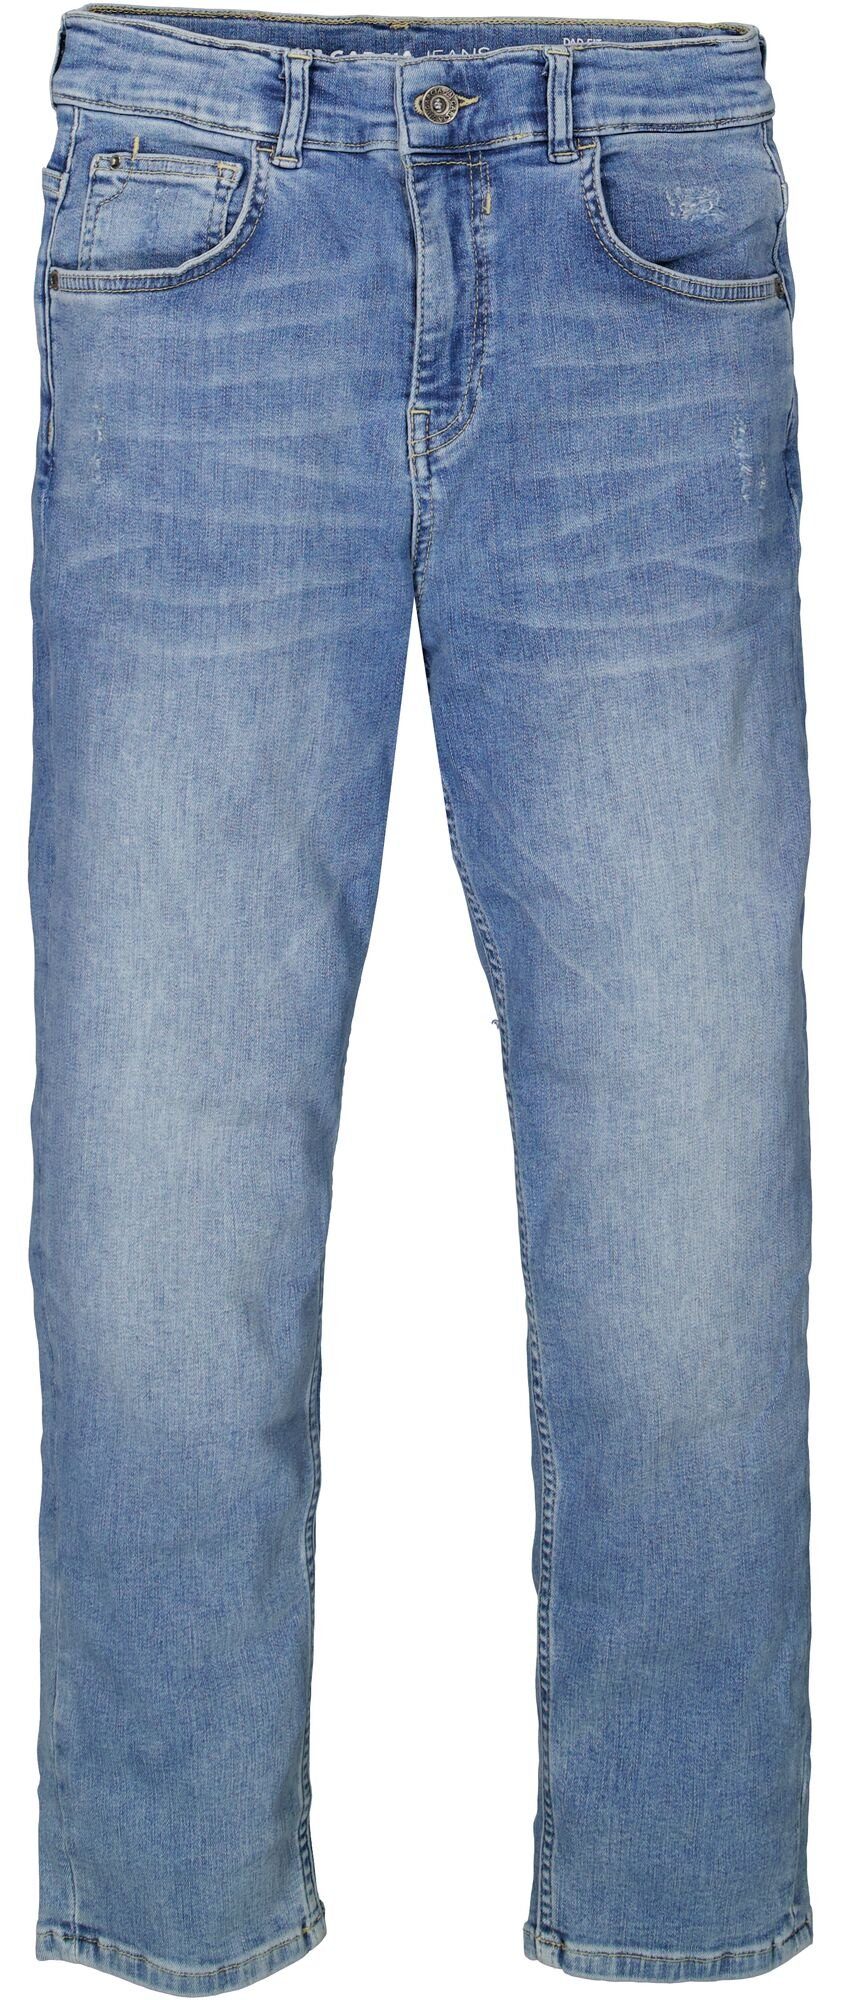 Dalino relaxed Comfort-fit-Jeans Größe Jeans fit Garcia Plus